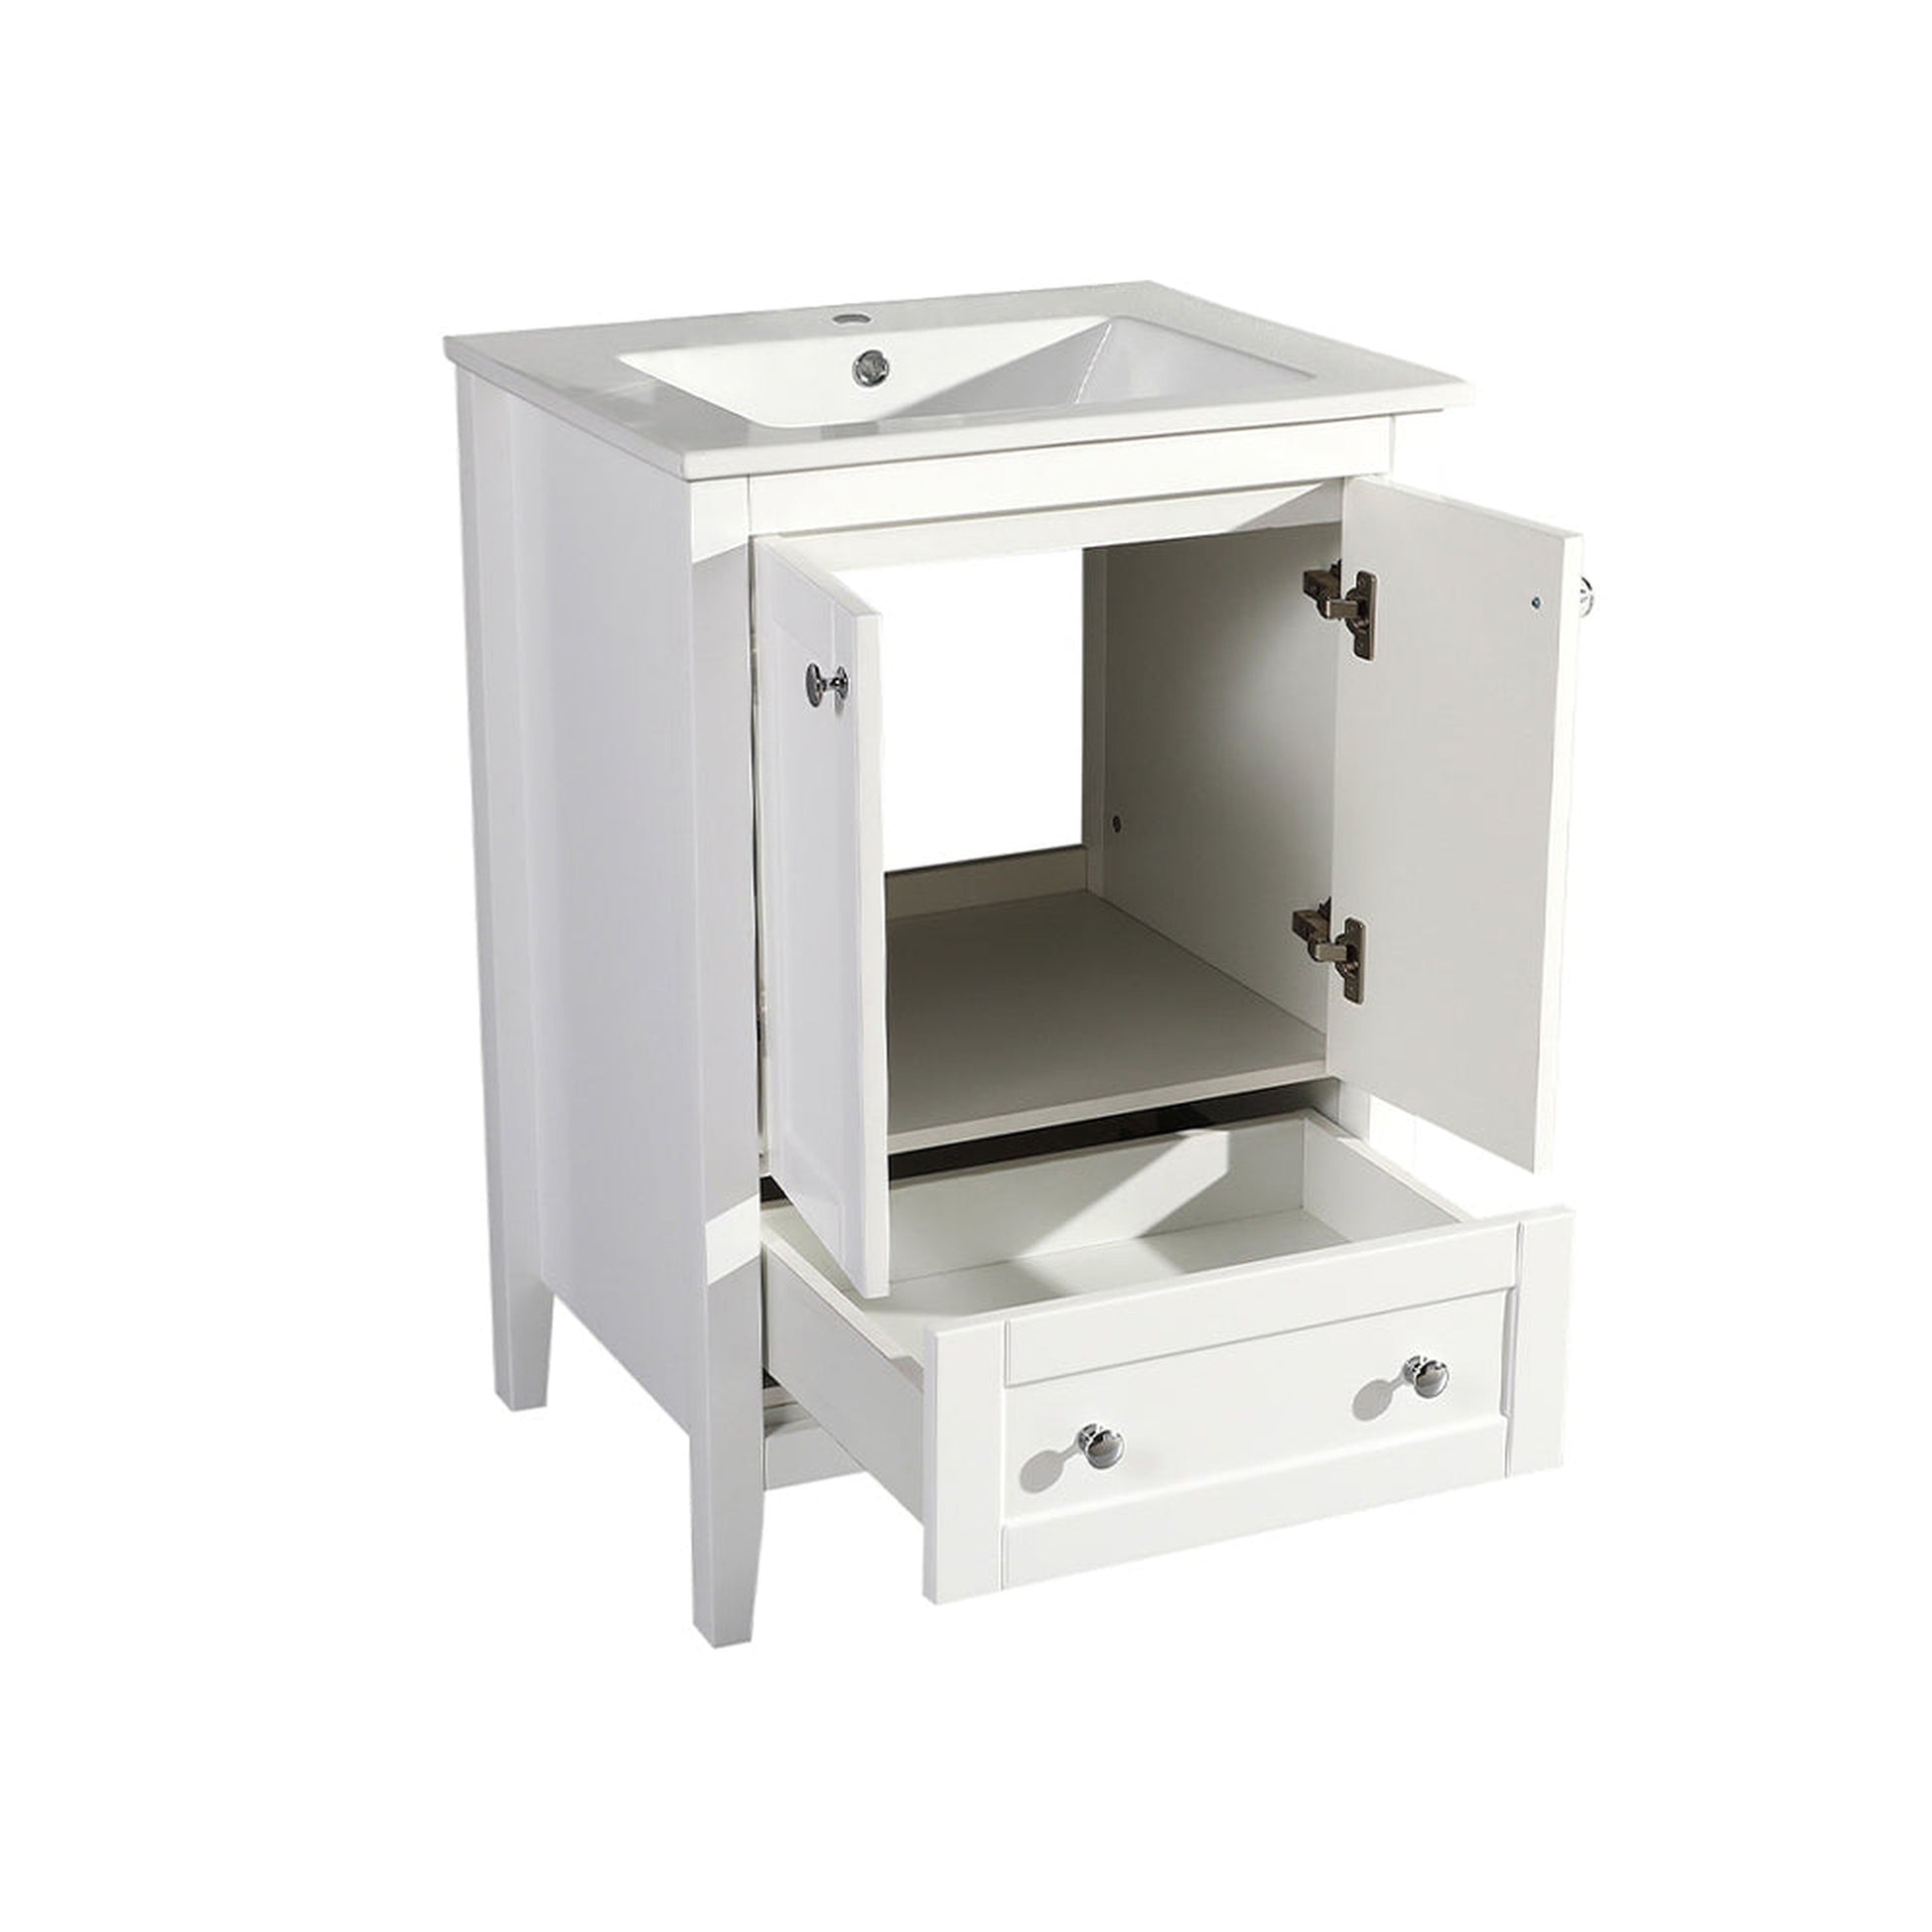 Swiss Madison Cannes 24" x 35" Freestanding Glossy White Bathroom Vanity With Ceramic Single Sink and Chrome Hardware